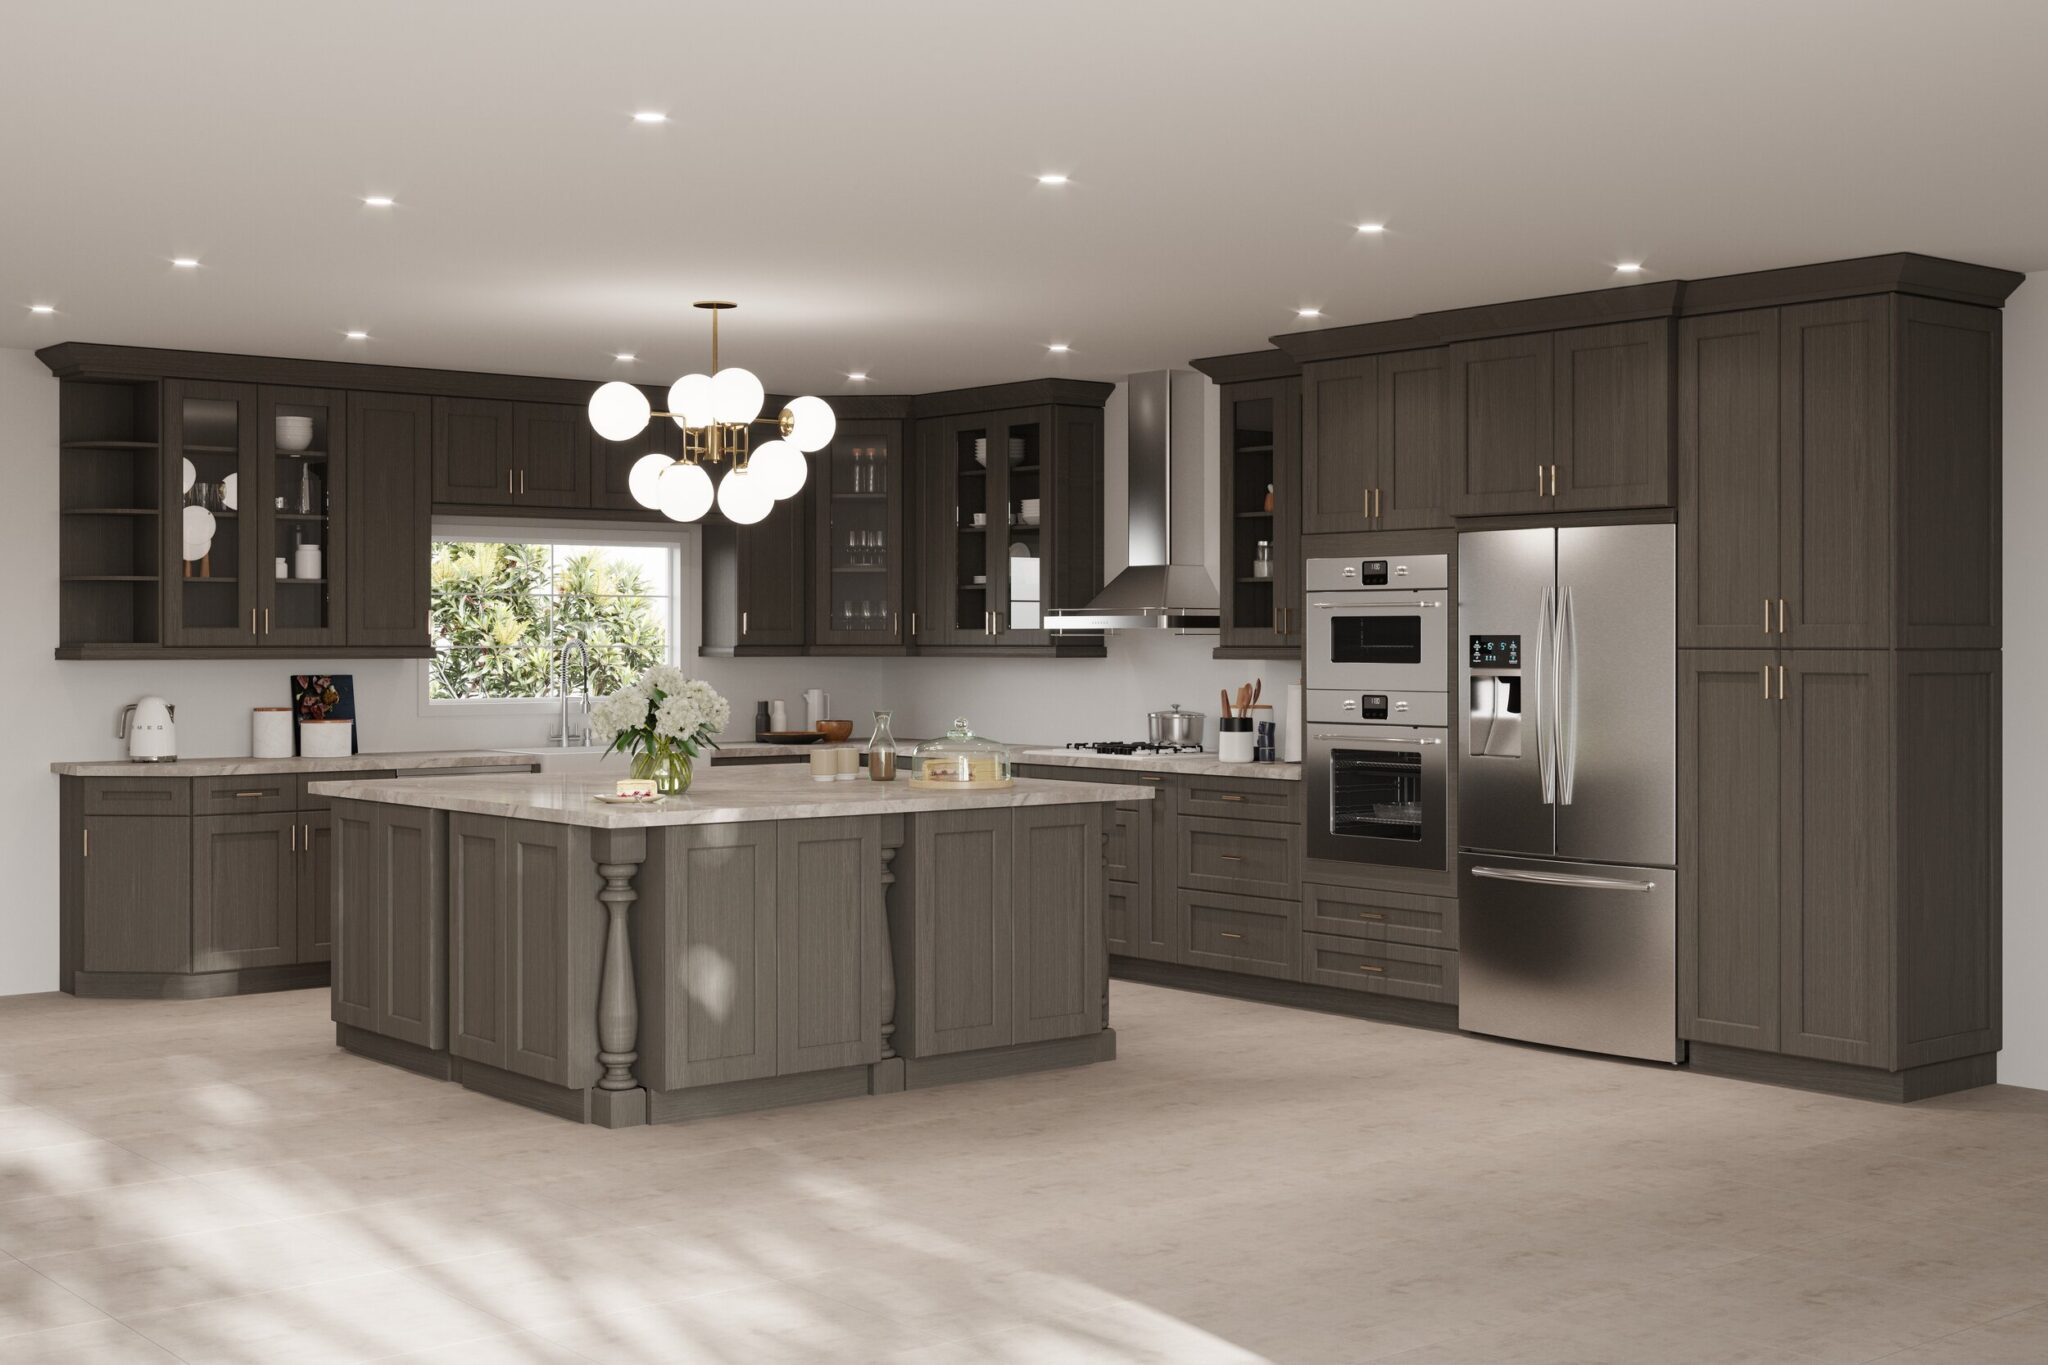 Luxury kitchen with pre-assembled kitchen cabinets